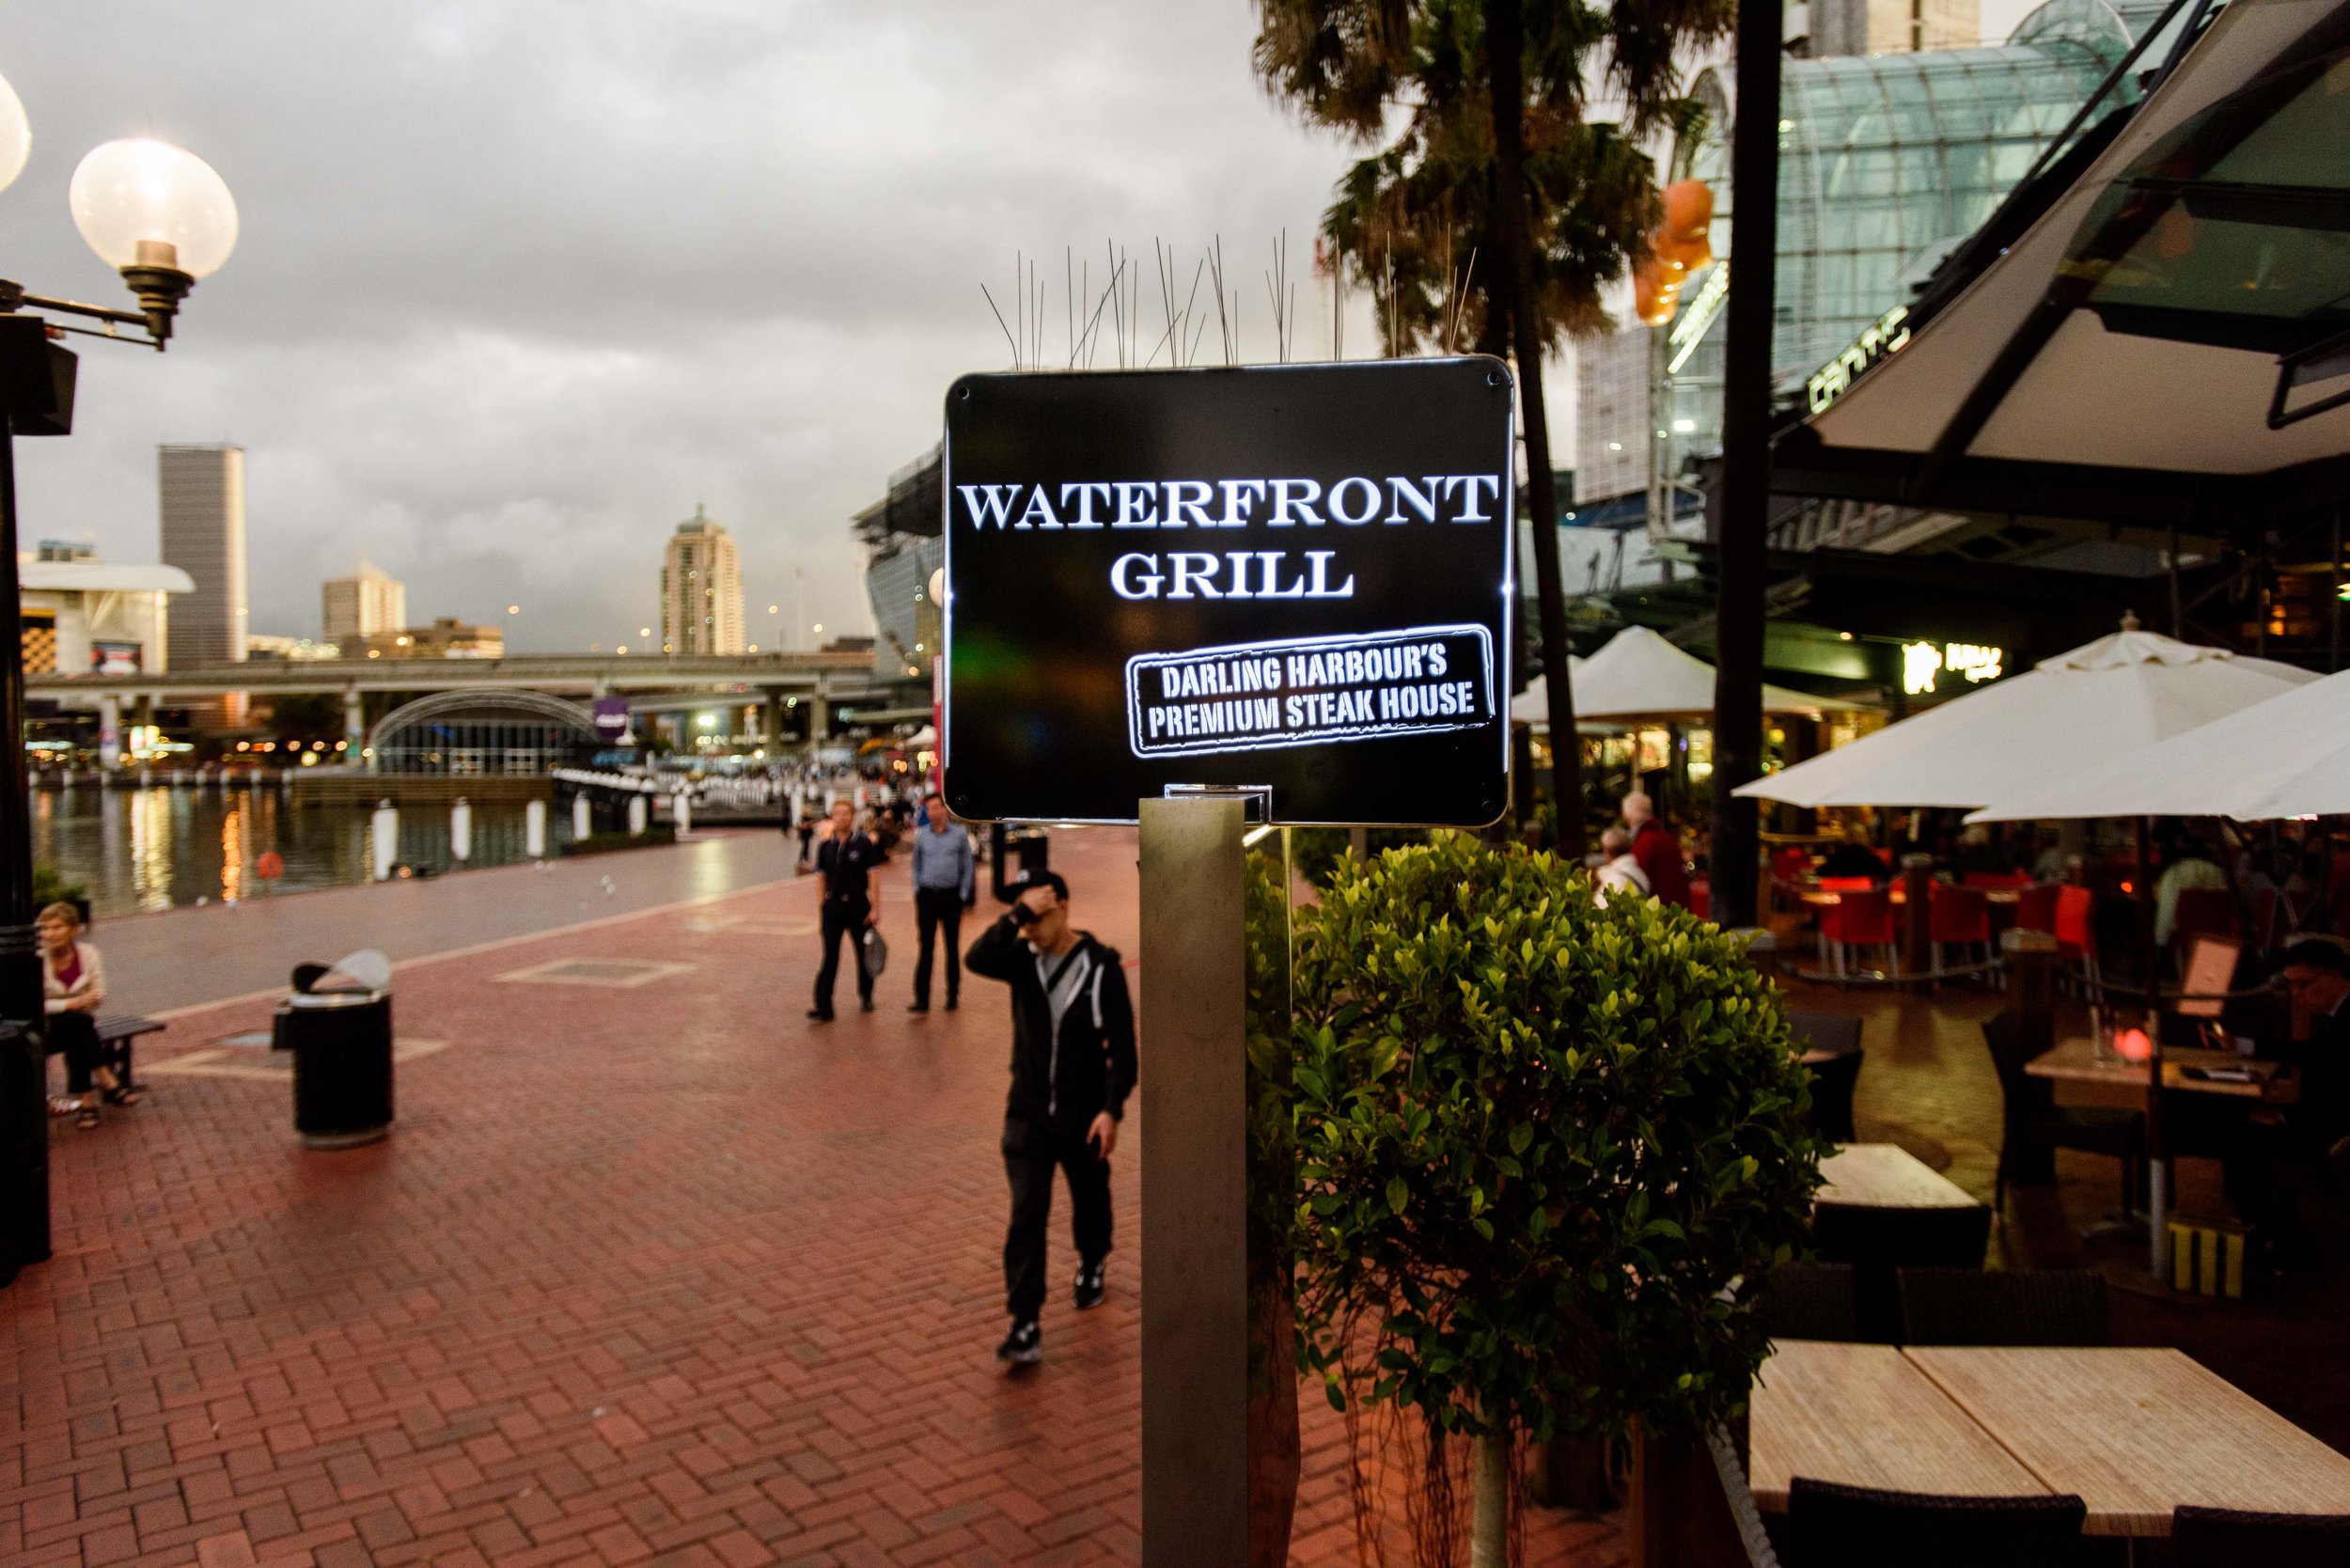 Waterfront-Grill-Venue-Feature.jpg